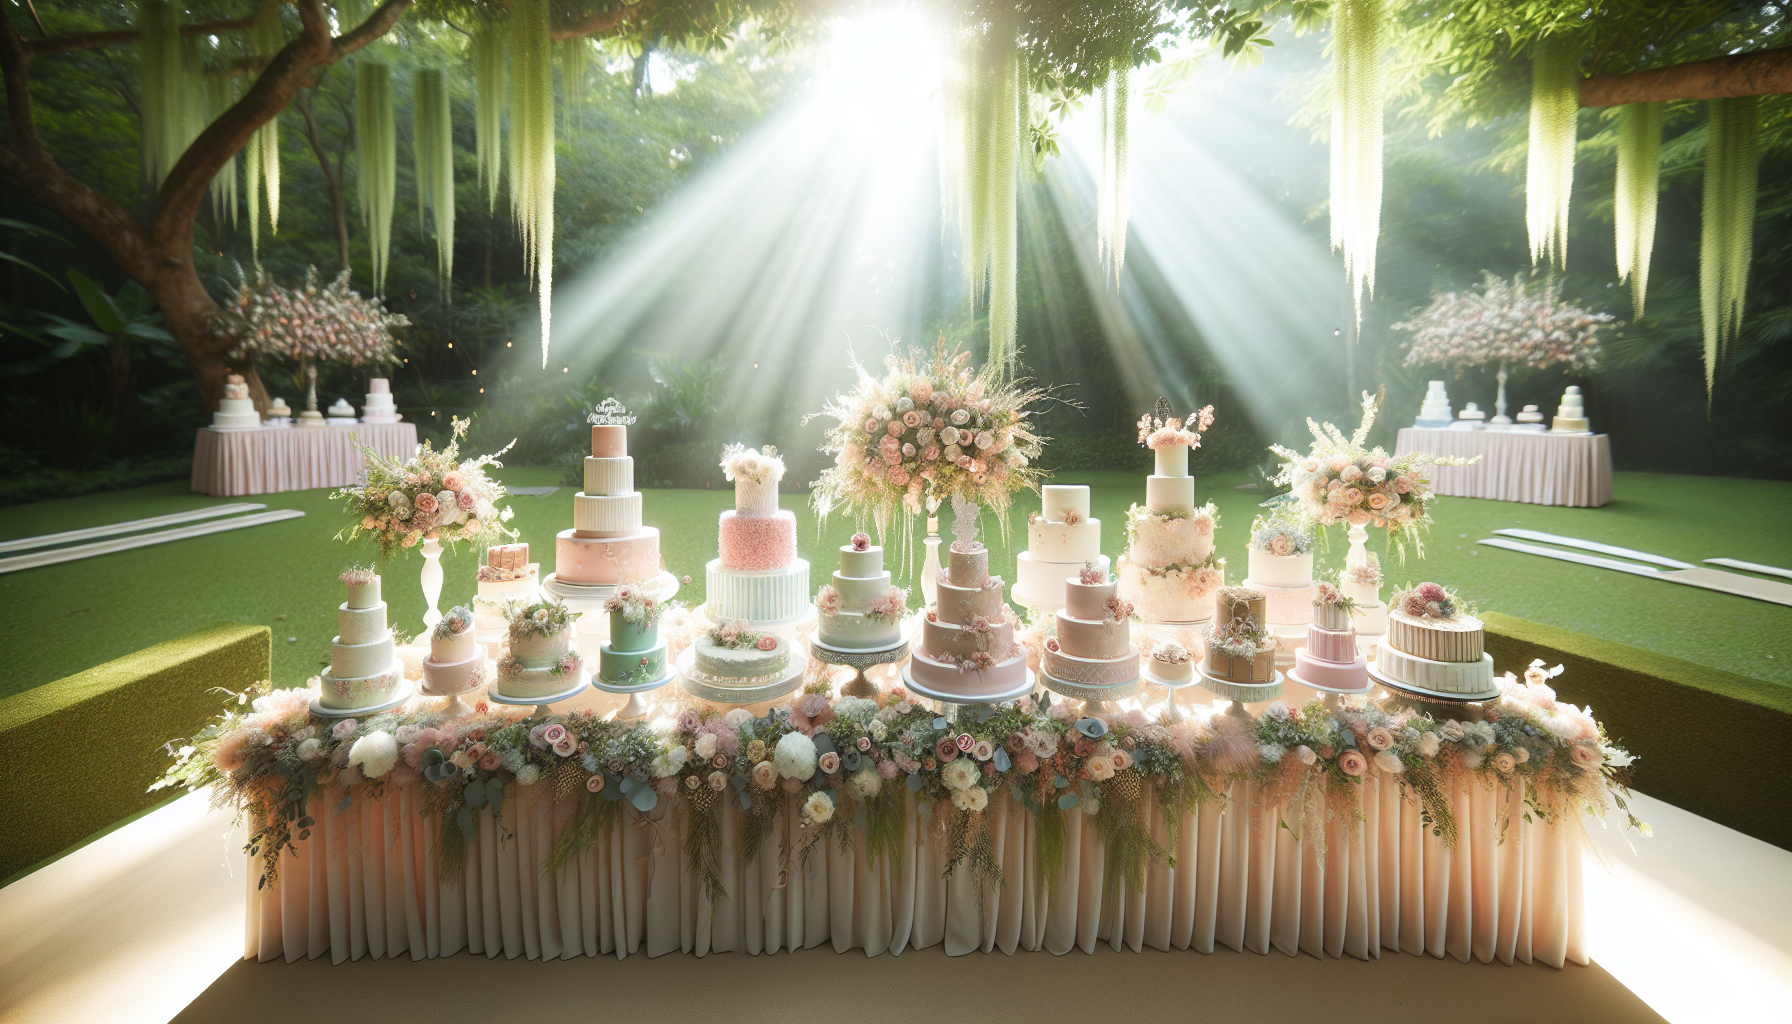 A beautifully styled photograph of a wedding cake table set up in a lush ga